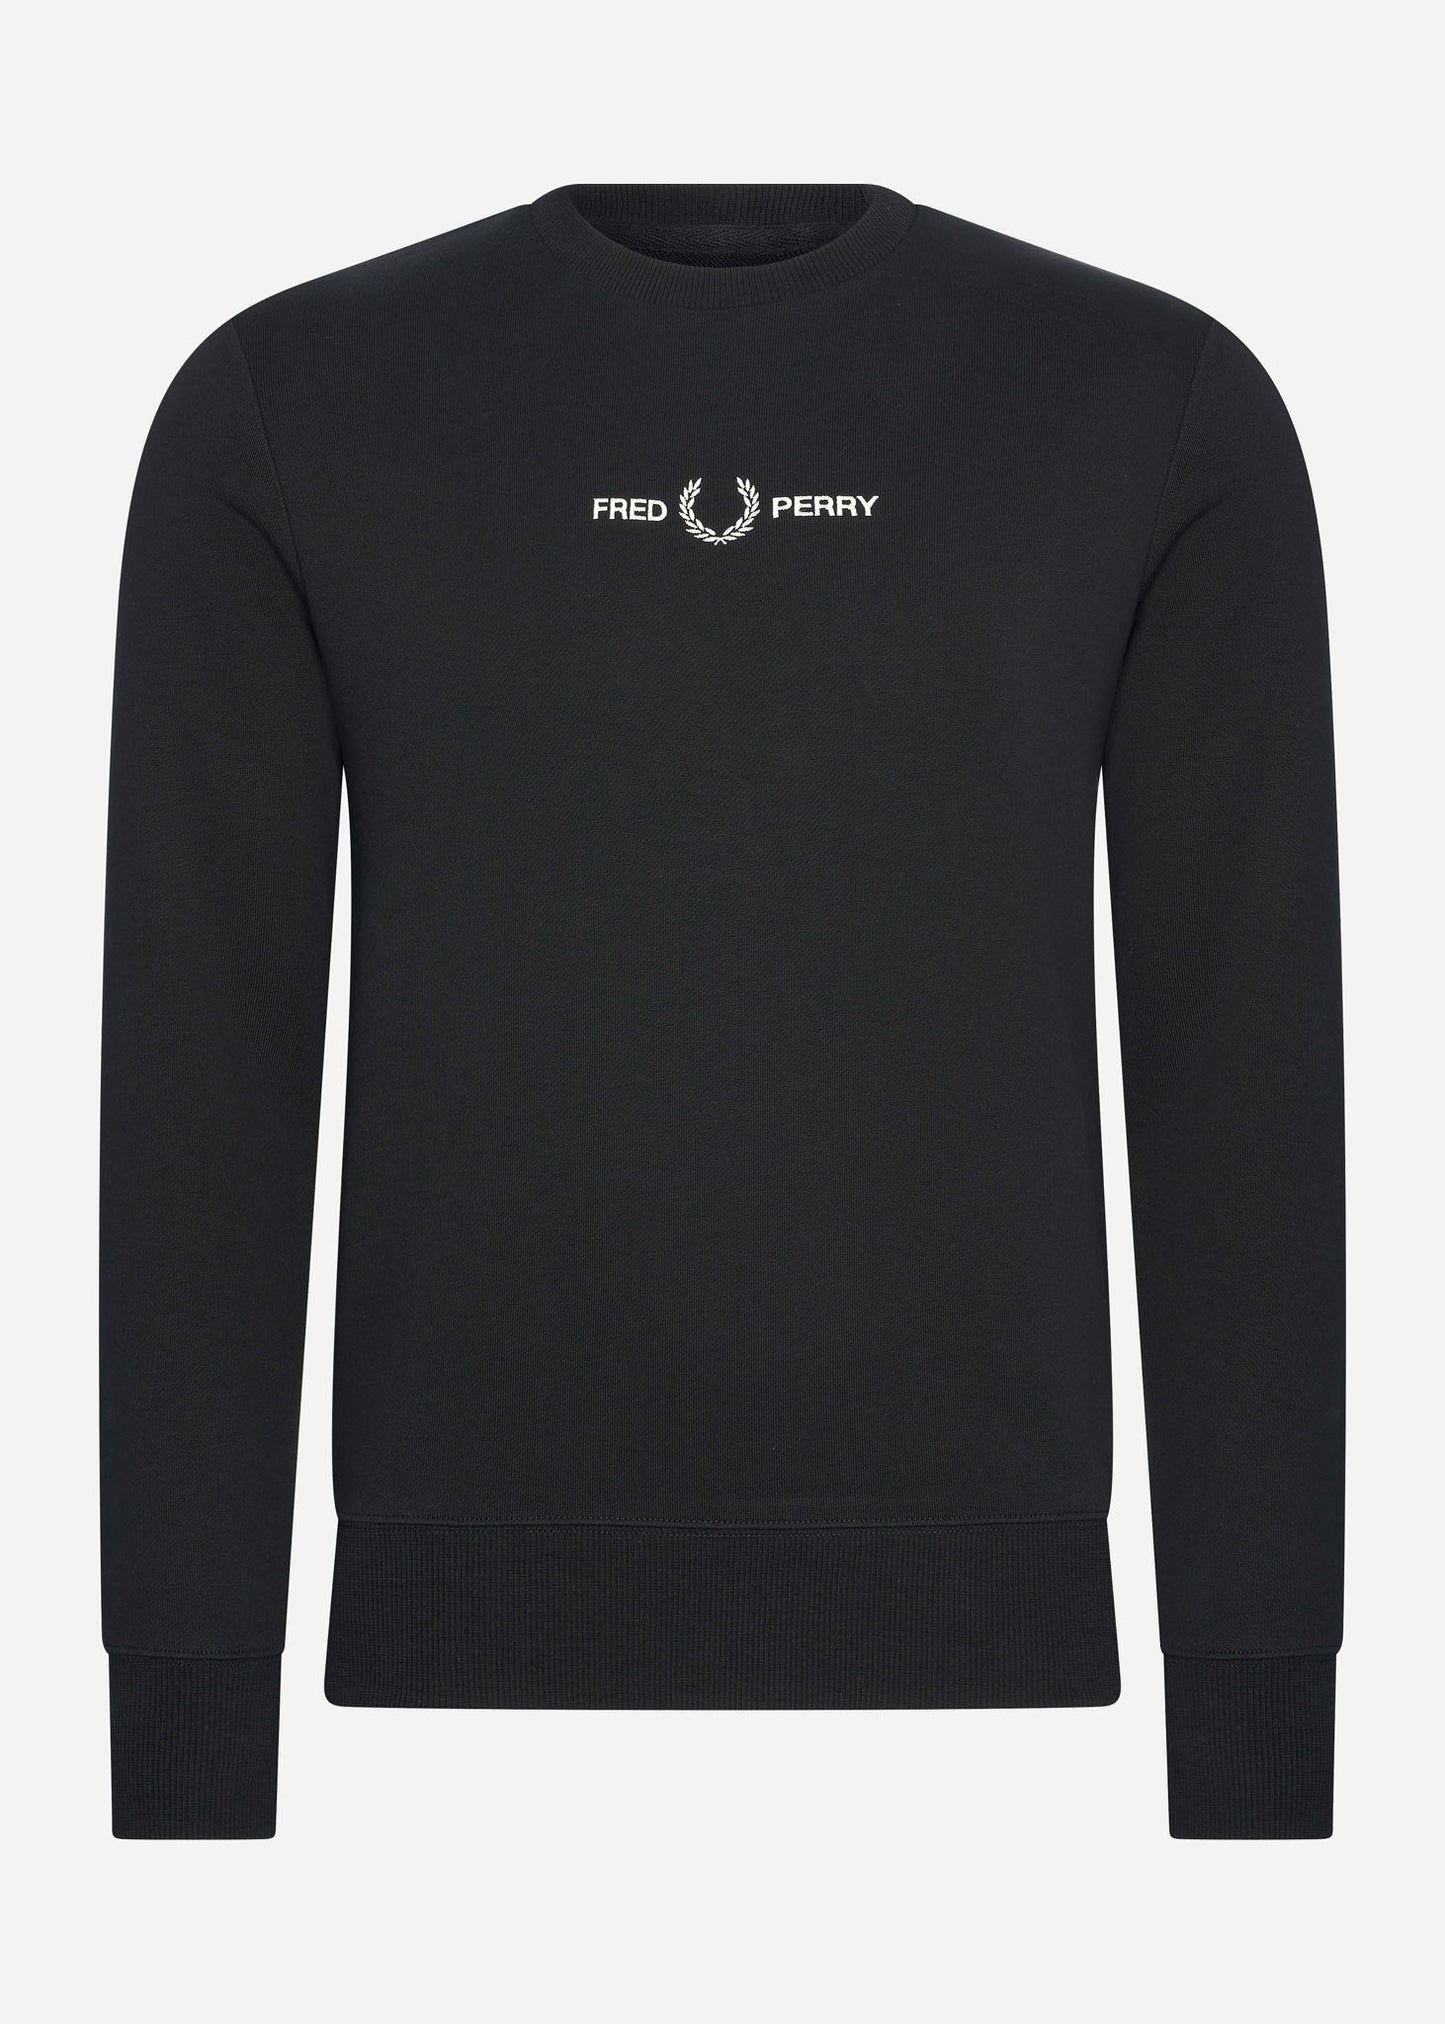 fred perry embroidered sweatshirt trui met logo borduring 